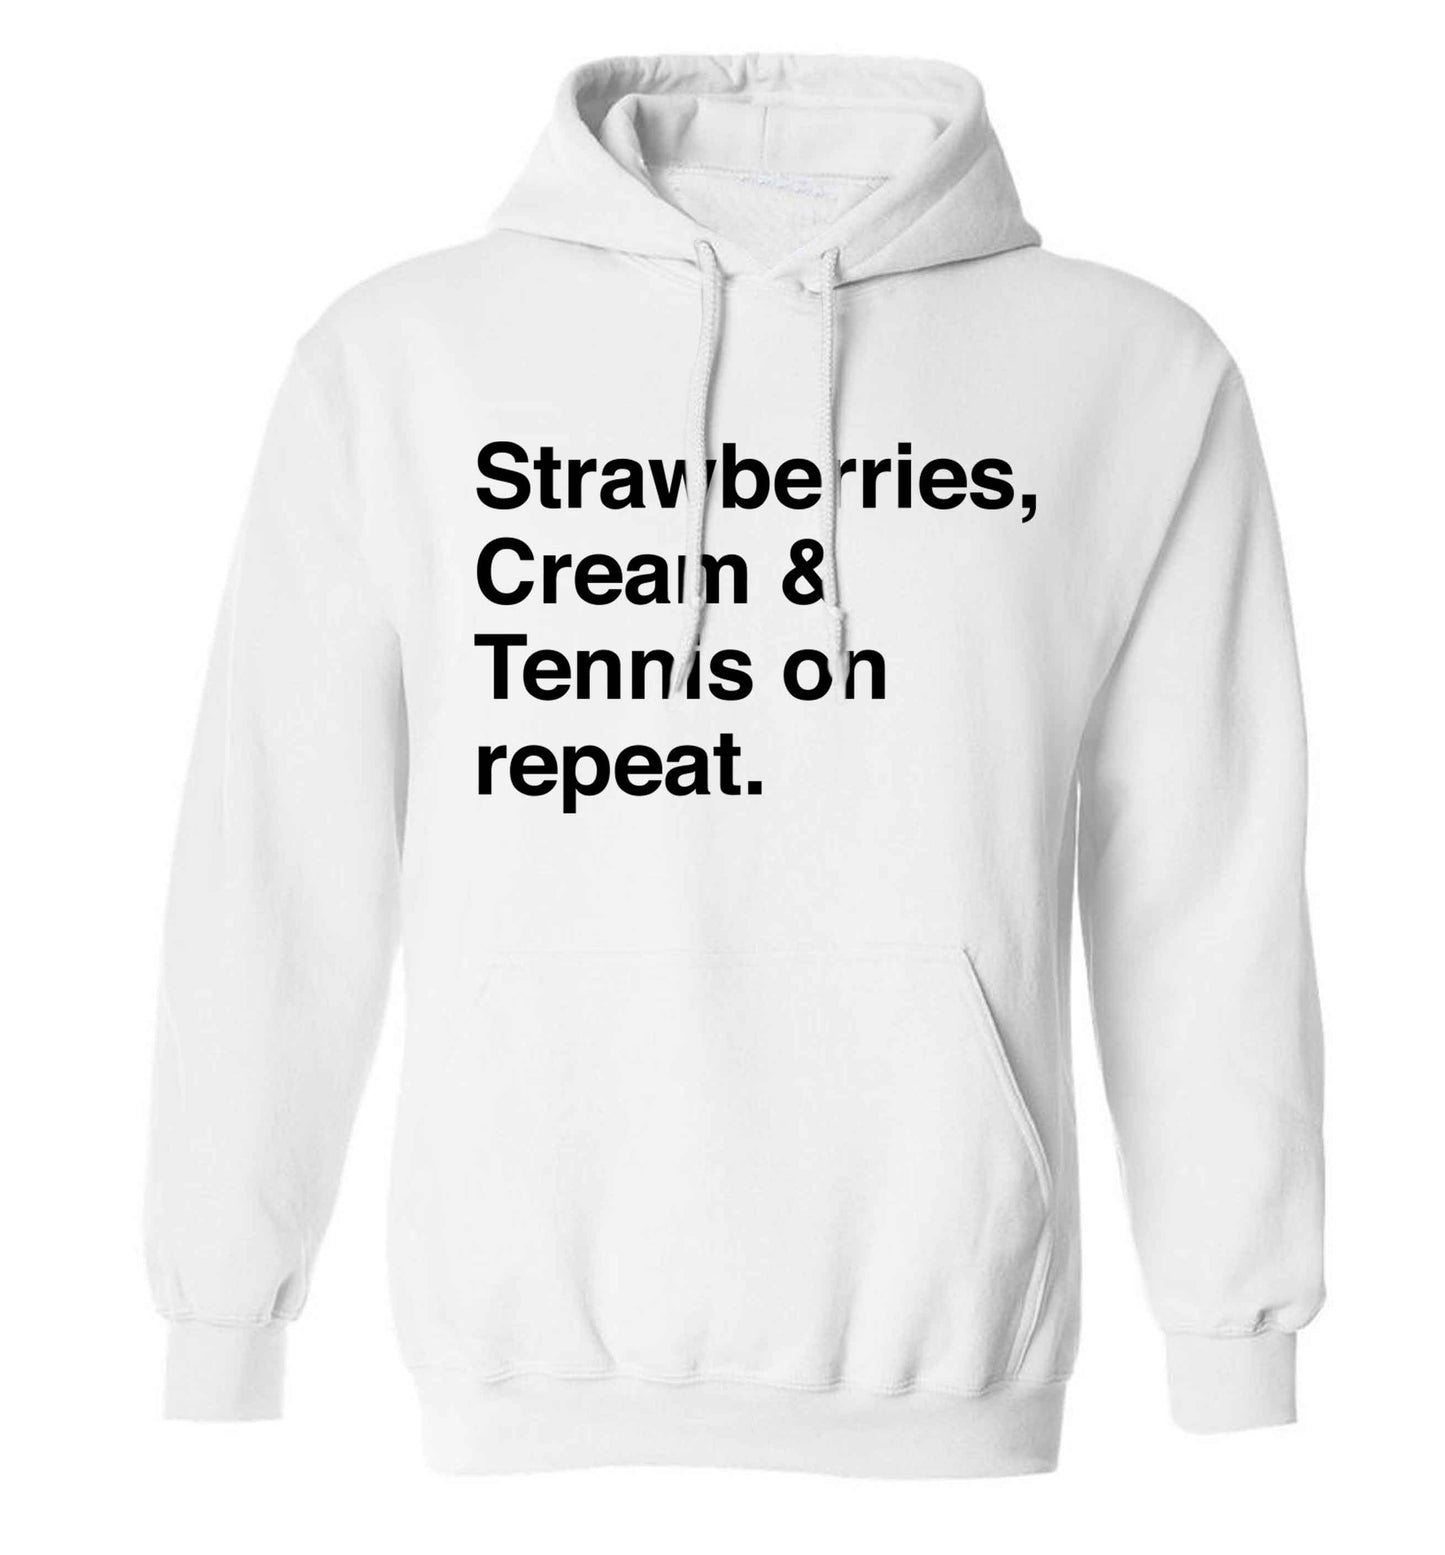 Strawberries, cream and tennis on repeat adults unisex white hoodie 2XL